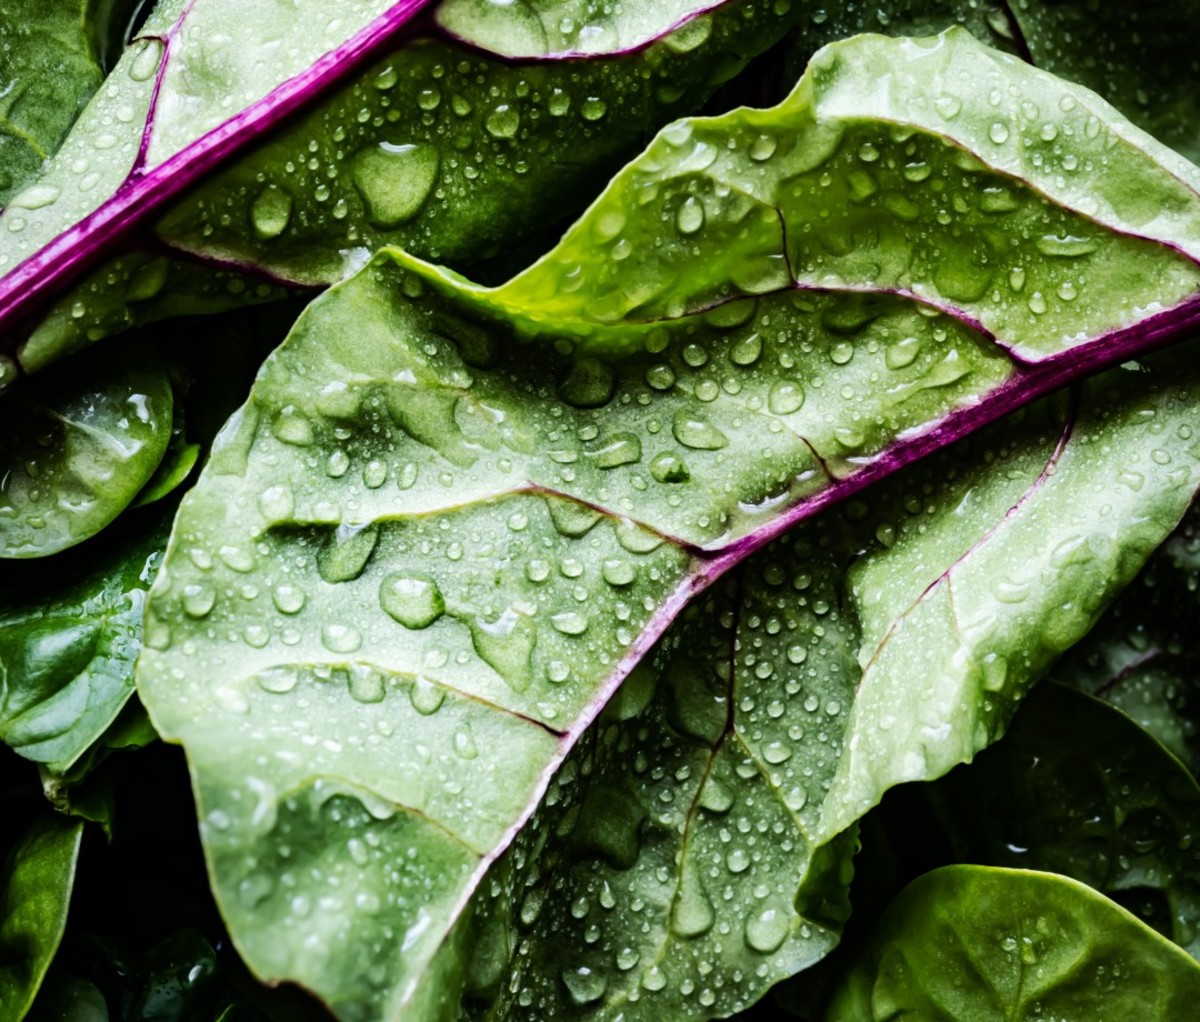 Leafy greens with water droplets